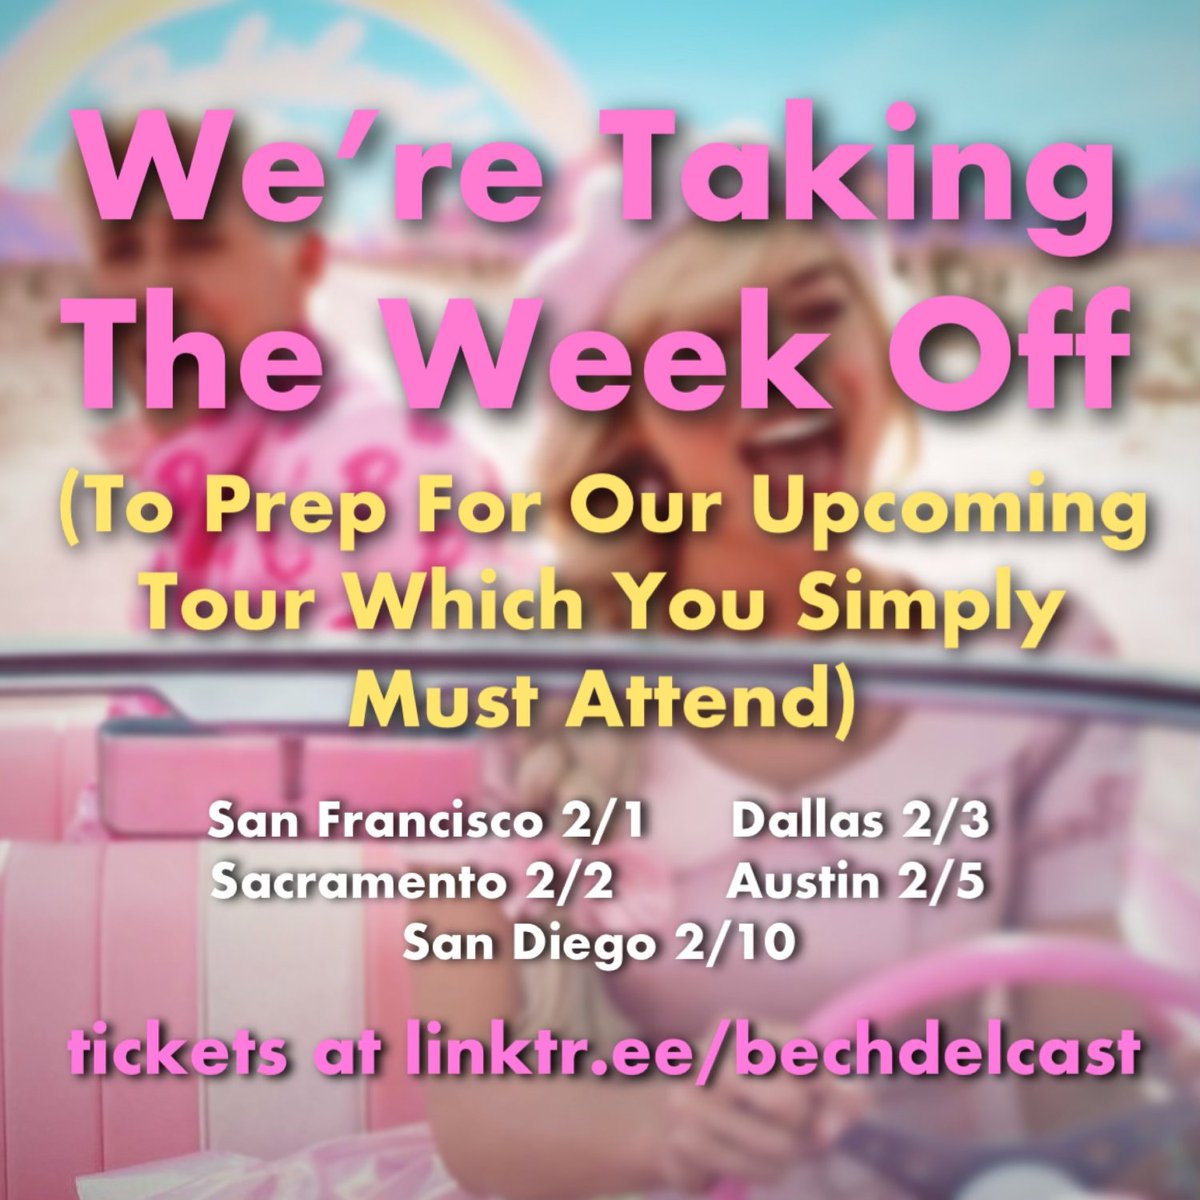 MINI-EPISODE ALERT! Come see us on our BARBIE Tour! tickets: linktr.ee/bechdelcast